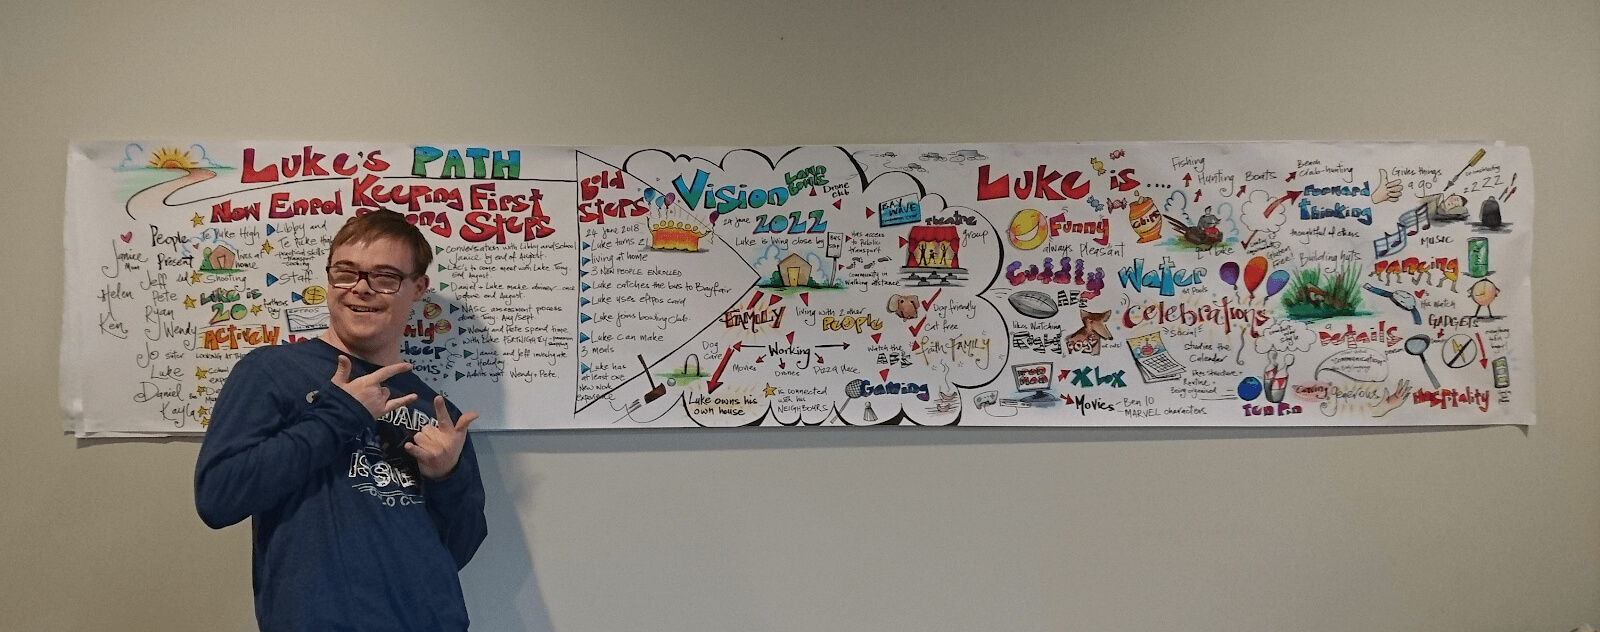 Photograph of a client called Luke smiling in front of a long piece of paper that has a lot of writing and illustrations on it that shows Luke's vision for the future, maps out how he will get from where he is to his desired future, and breaks this into achievable and manageable steps.